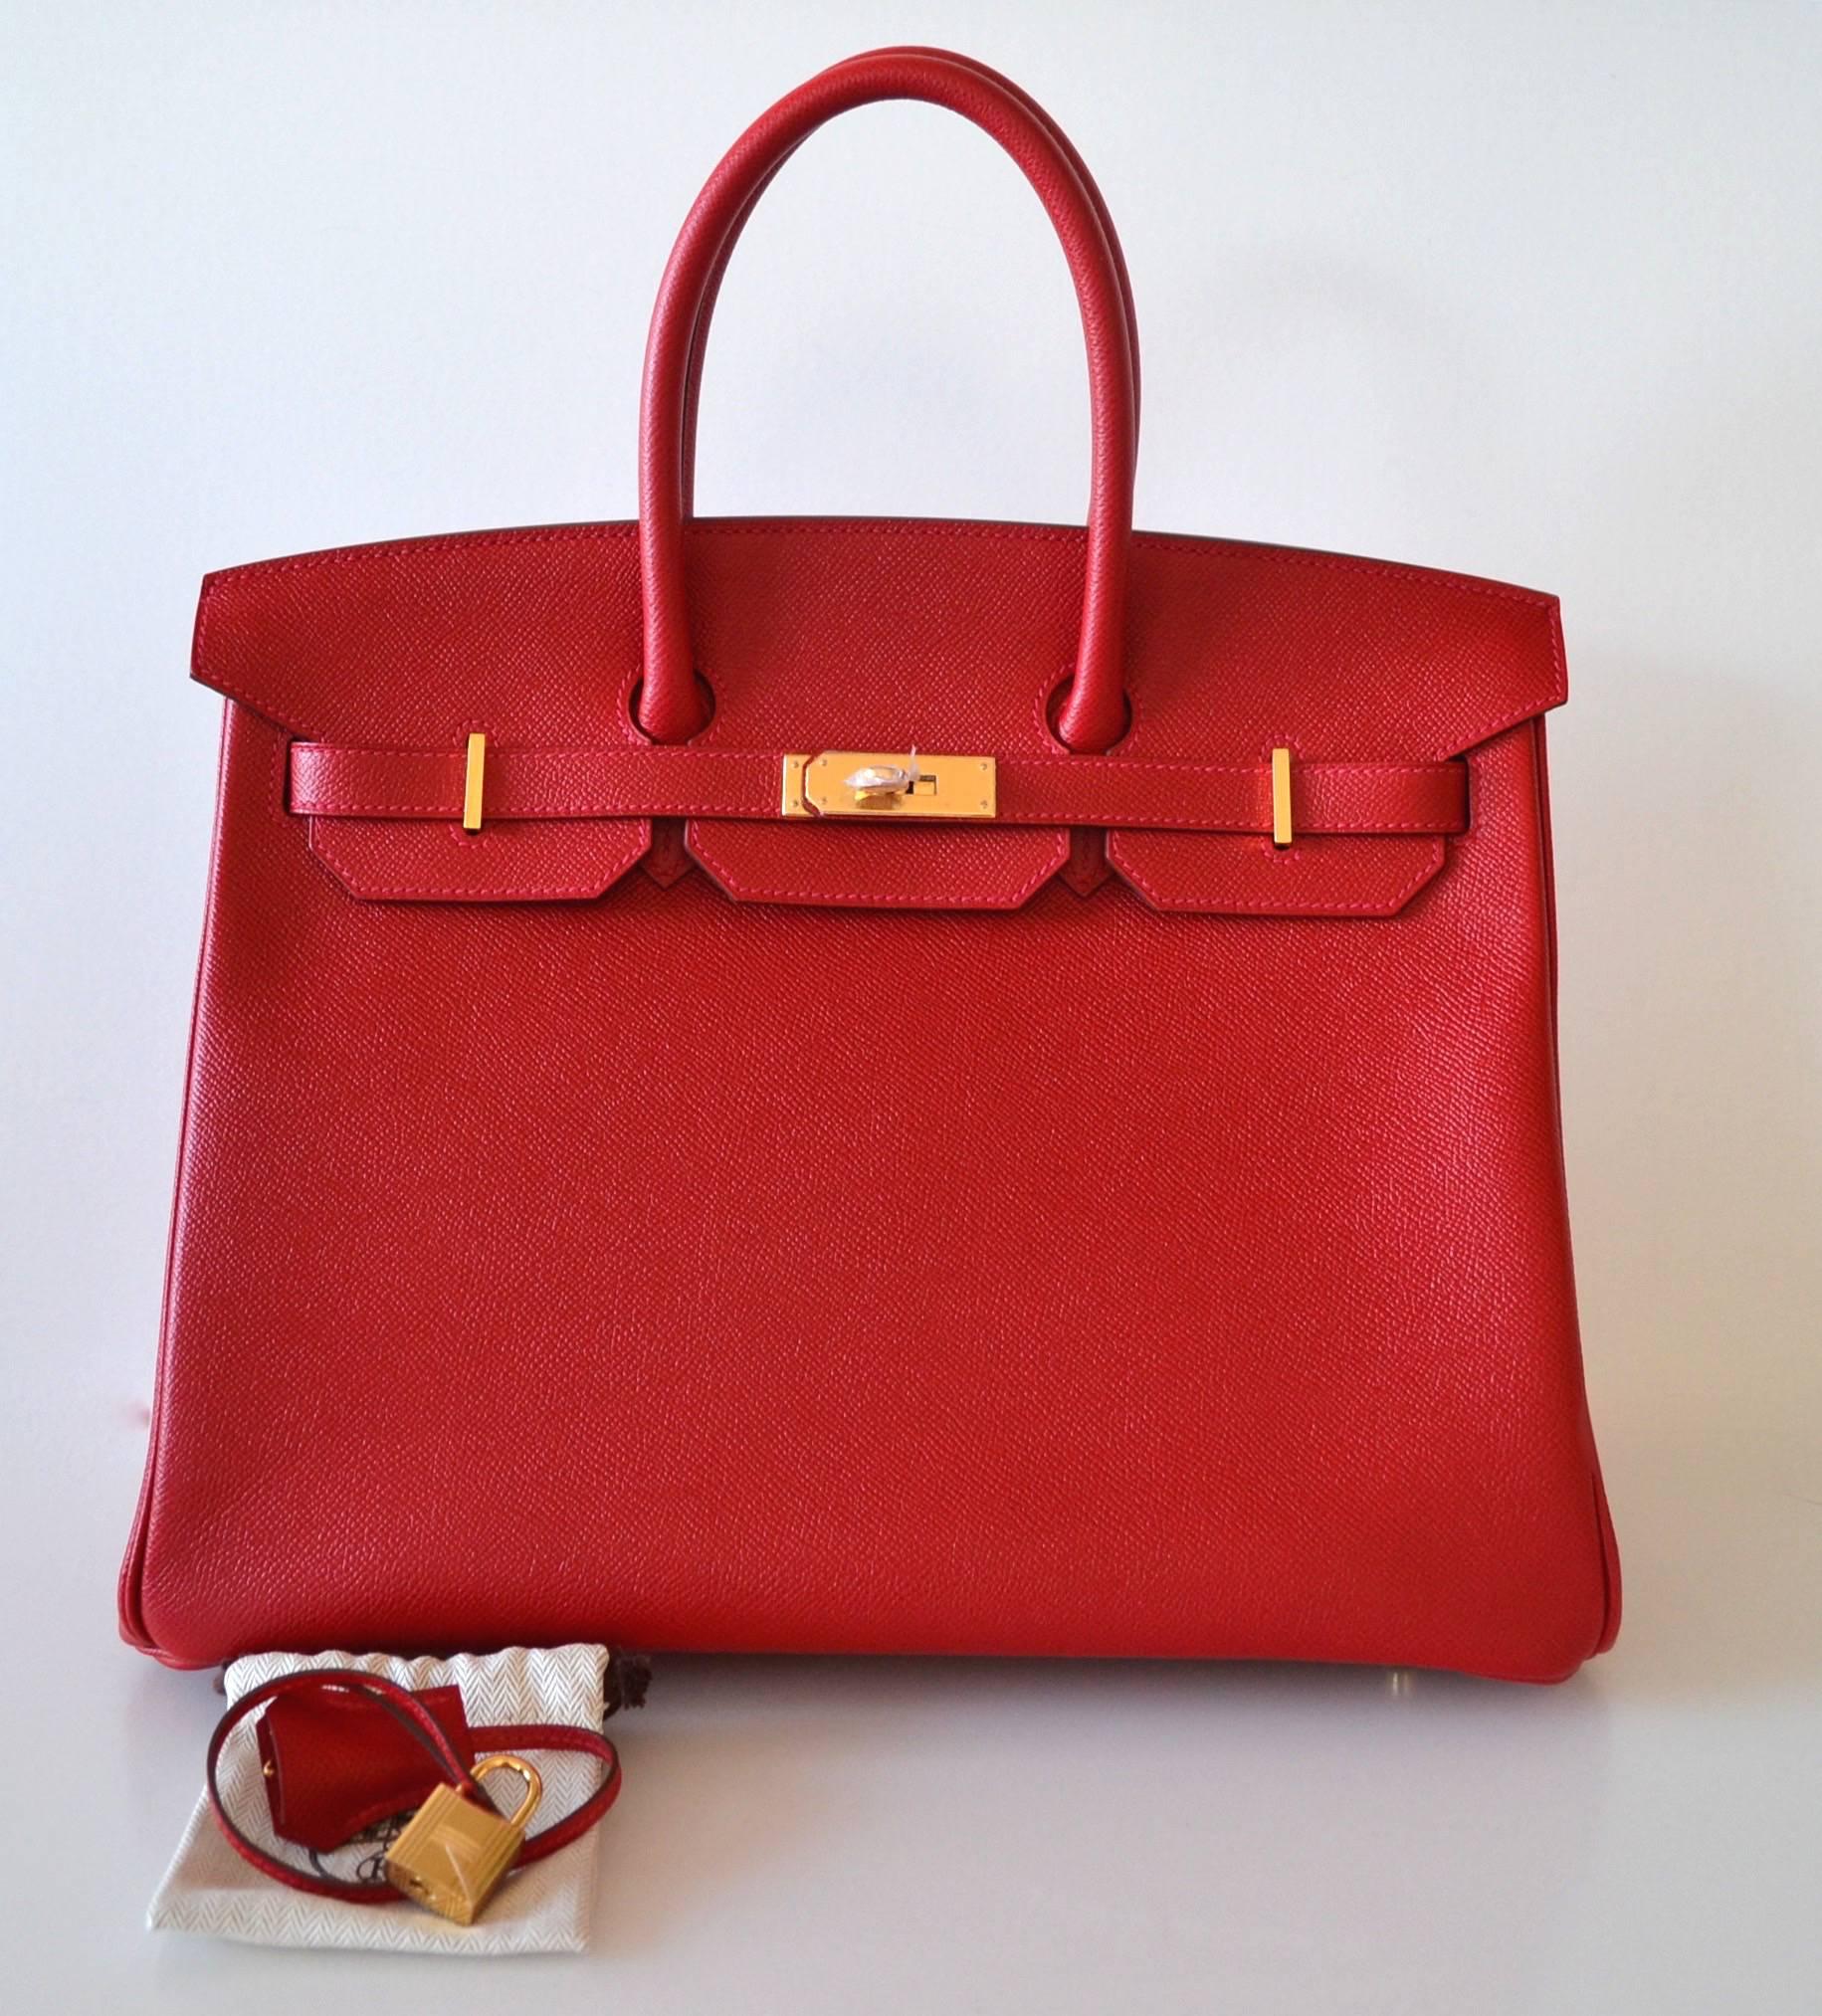 Hermès Birkin 35 Epsom Rouge Casaque ghdw
 
Epsom Leather 
Gold plated hardware
This Hermès Birkin is in new condition – Never used and never worn
Novembre 2015
 
Stamp T
Hermès Paris - Made In France
 
Dimensions:  
35 cm L x 25 cm H